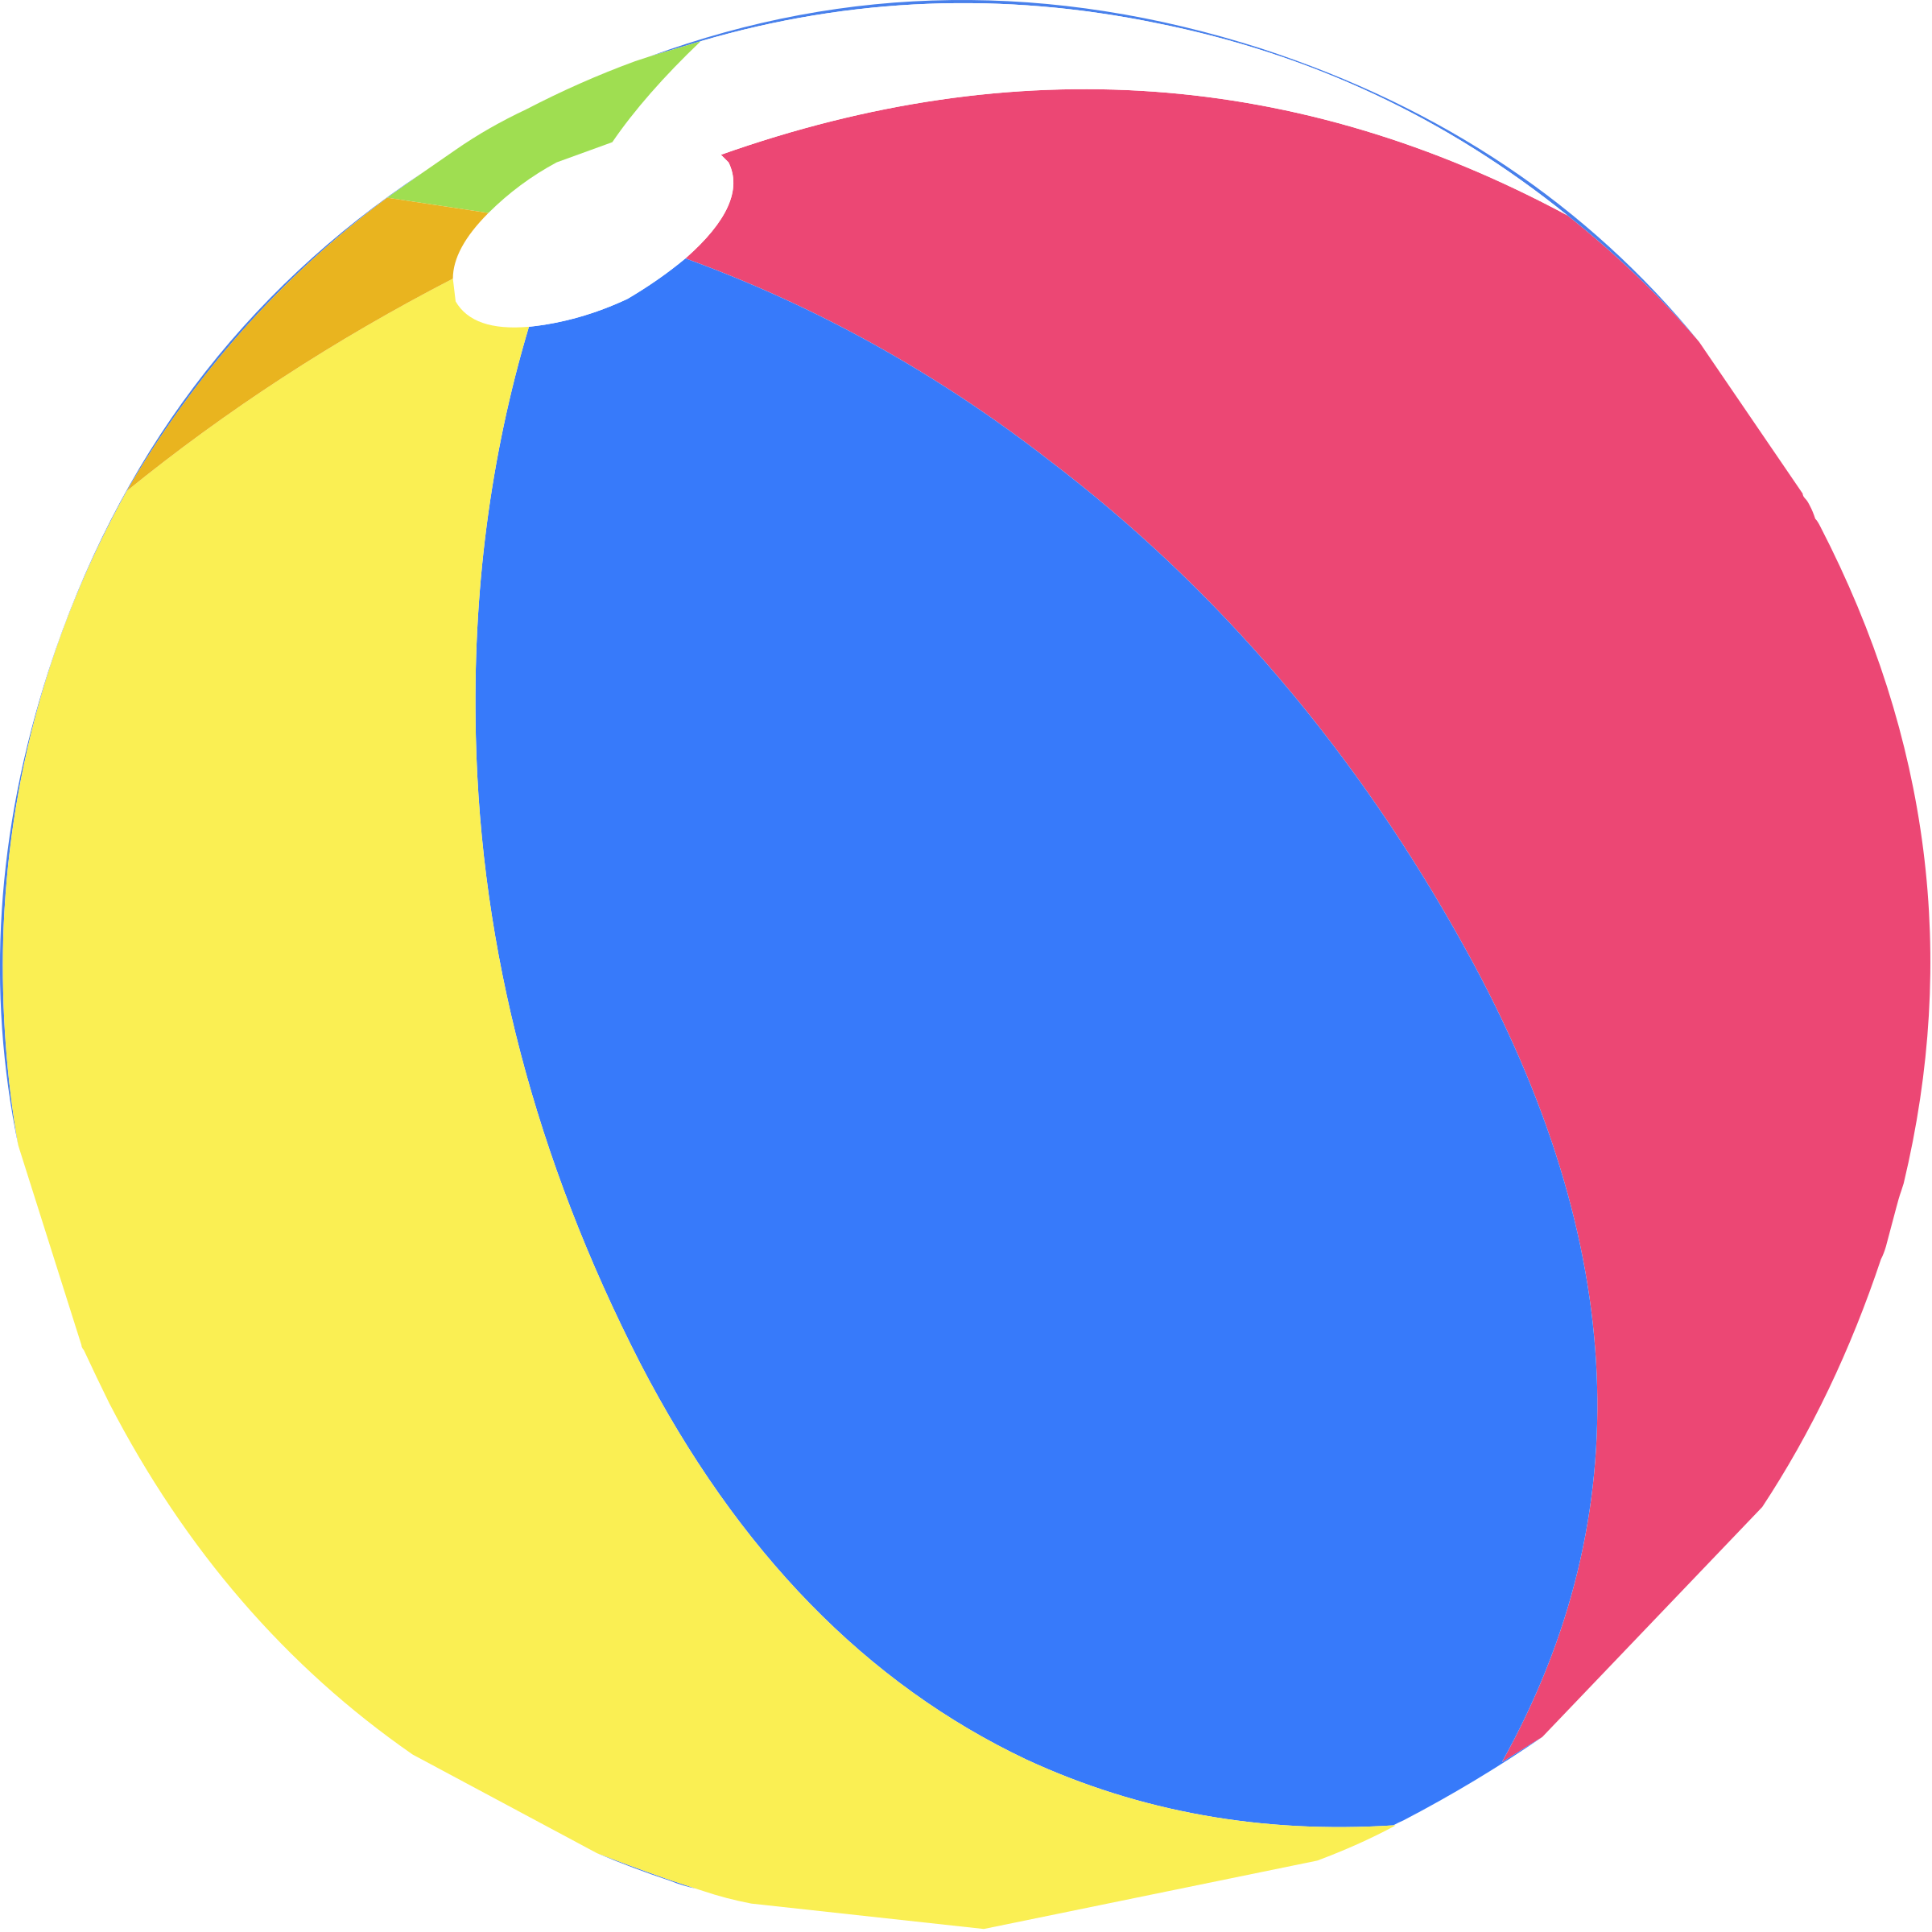 Water and beach ball clipart